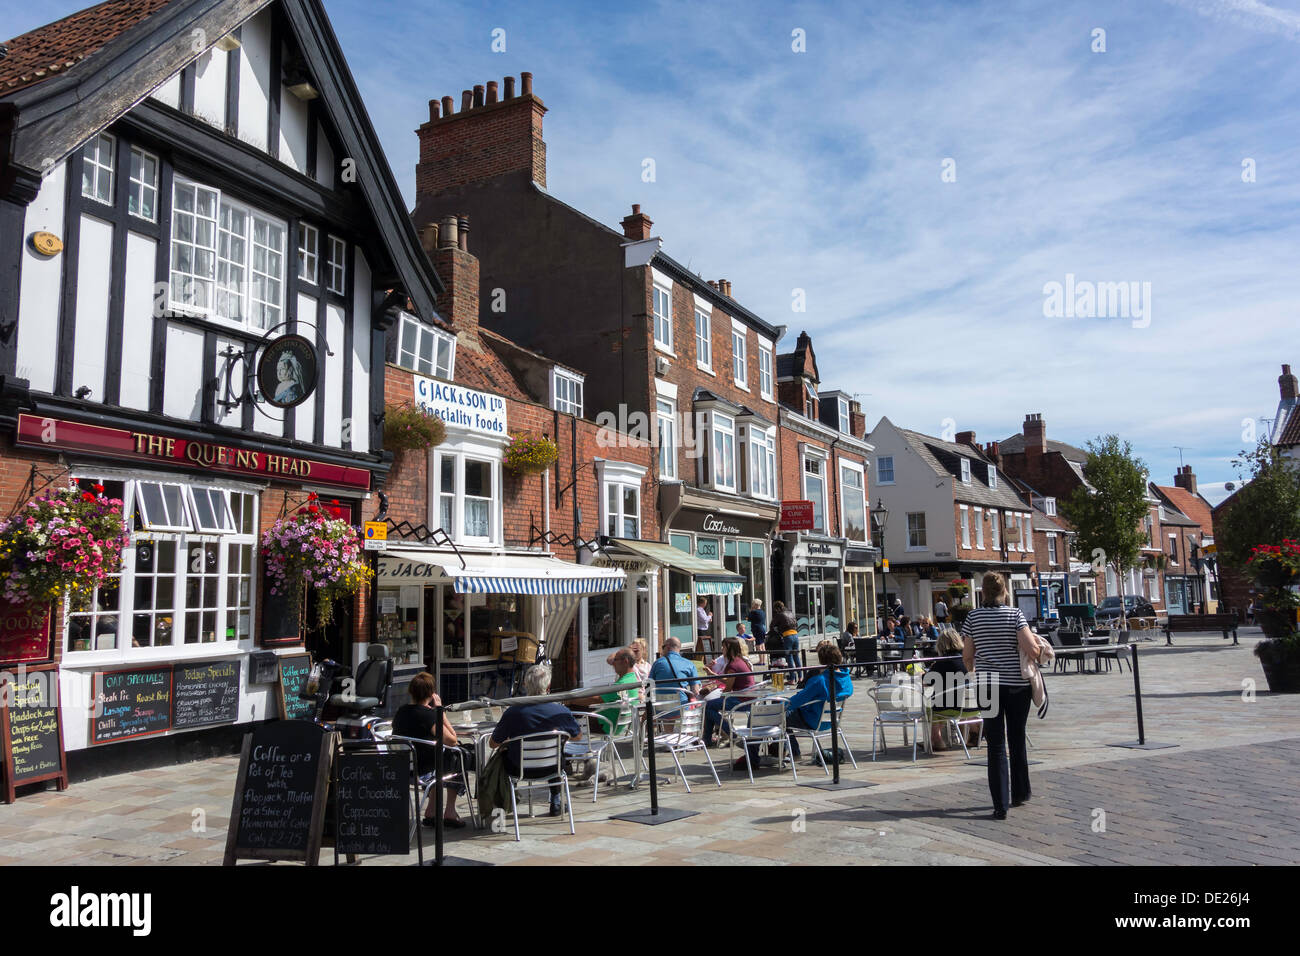 Wednesday Market a pedestrianised shopping area in the historic town of Beverley East Yorkshire Stock Photo